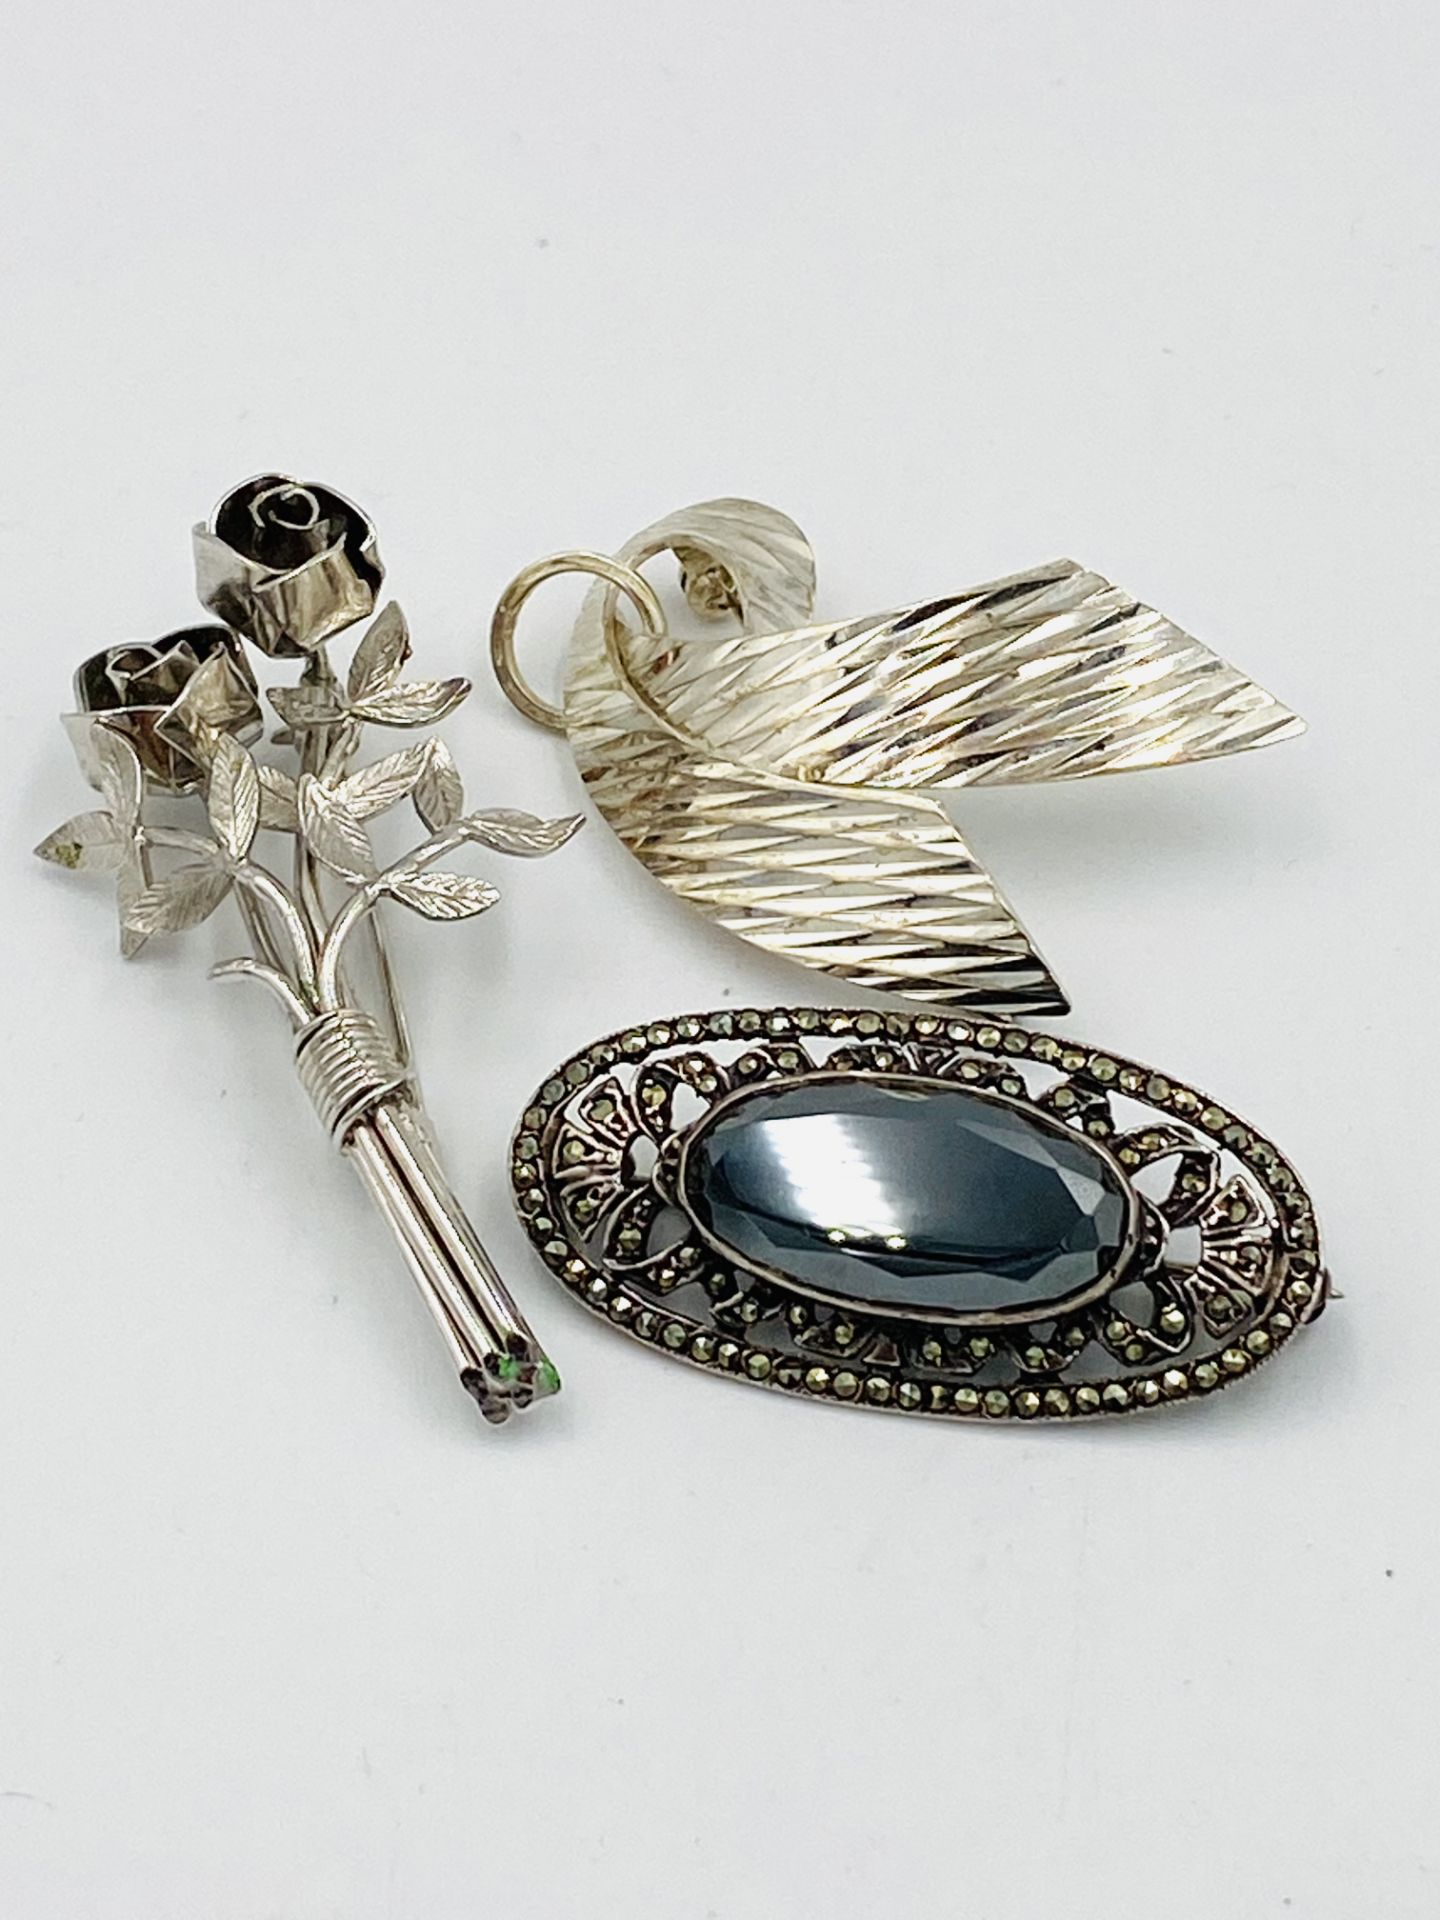 Three silver brooches